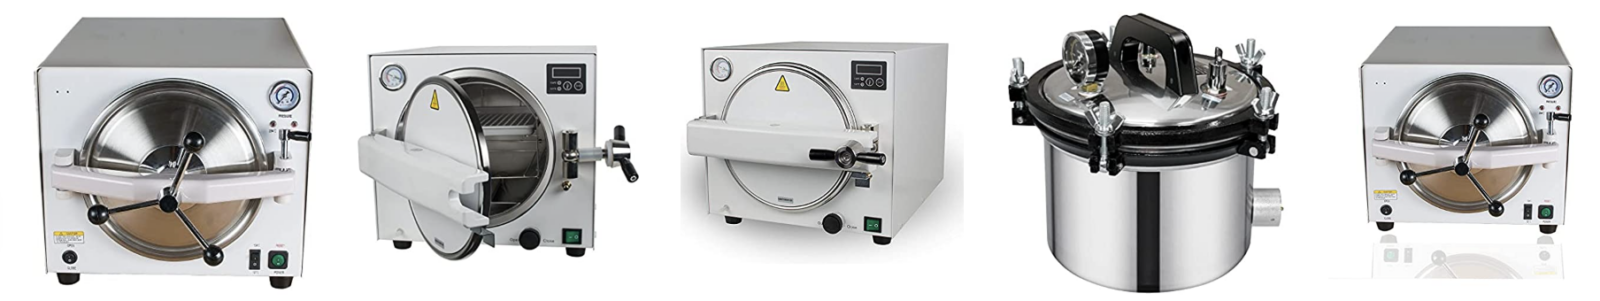 Find great deal for dental autoclaves on amazon